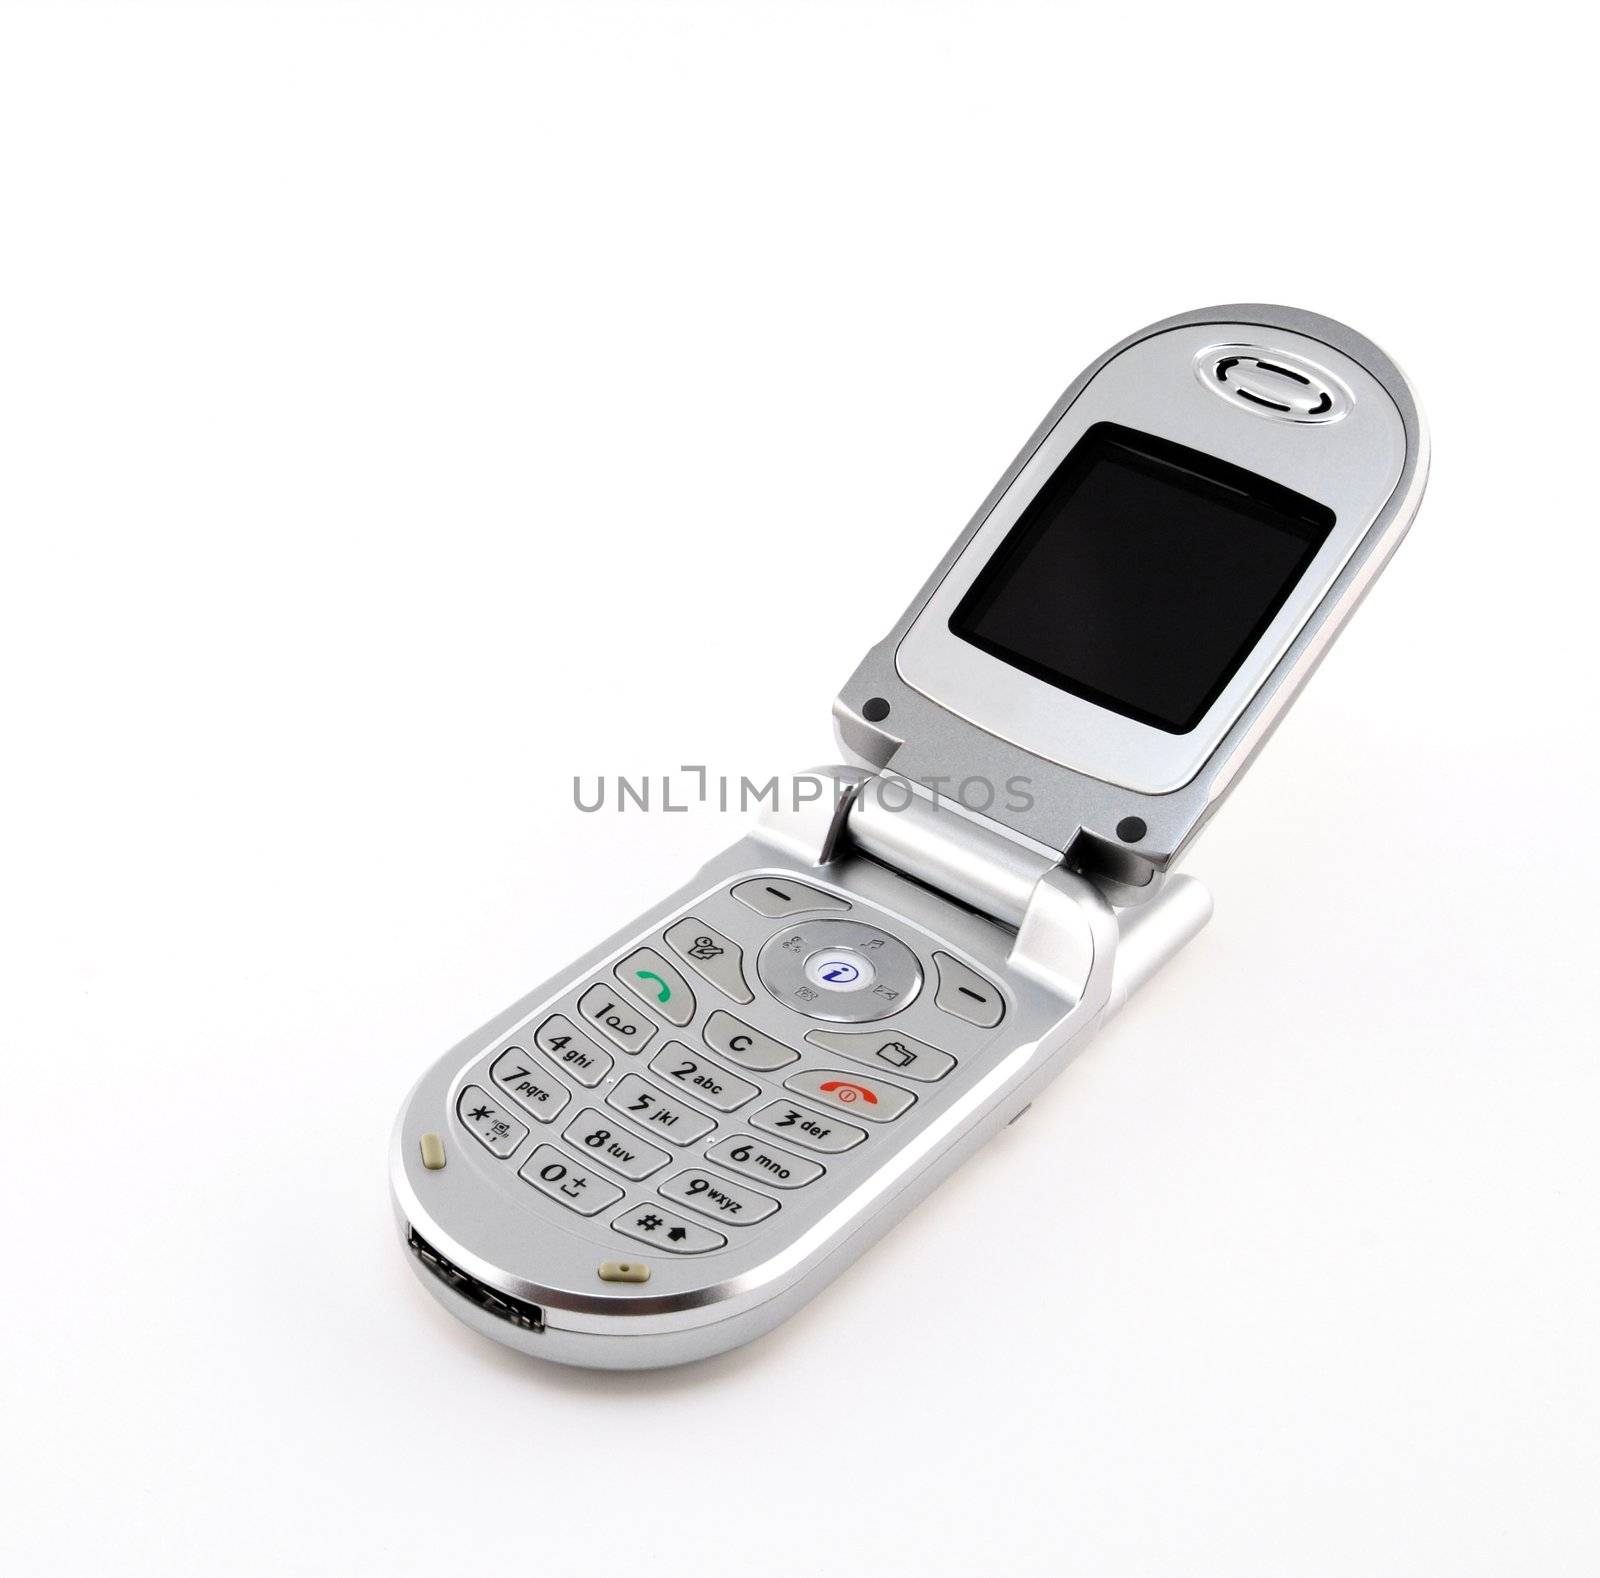 Clamshell cell phone on white background by anikasalsera